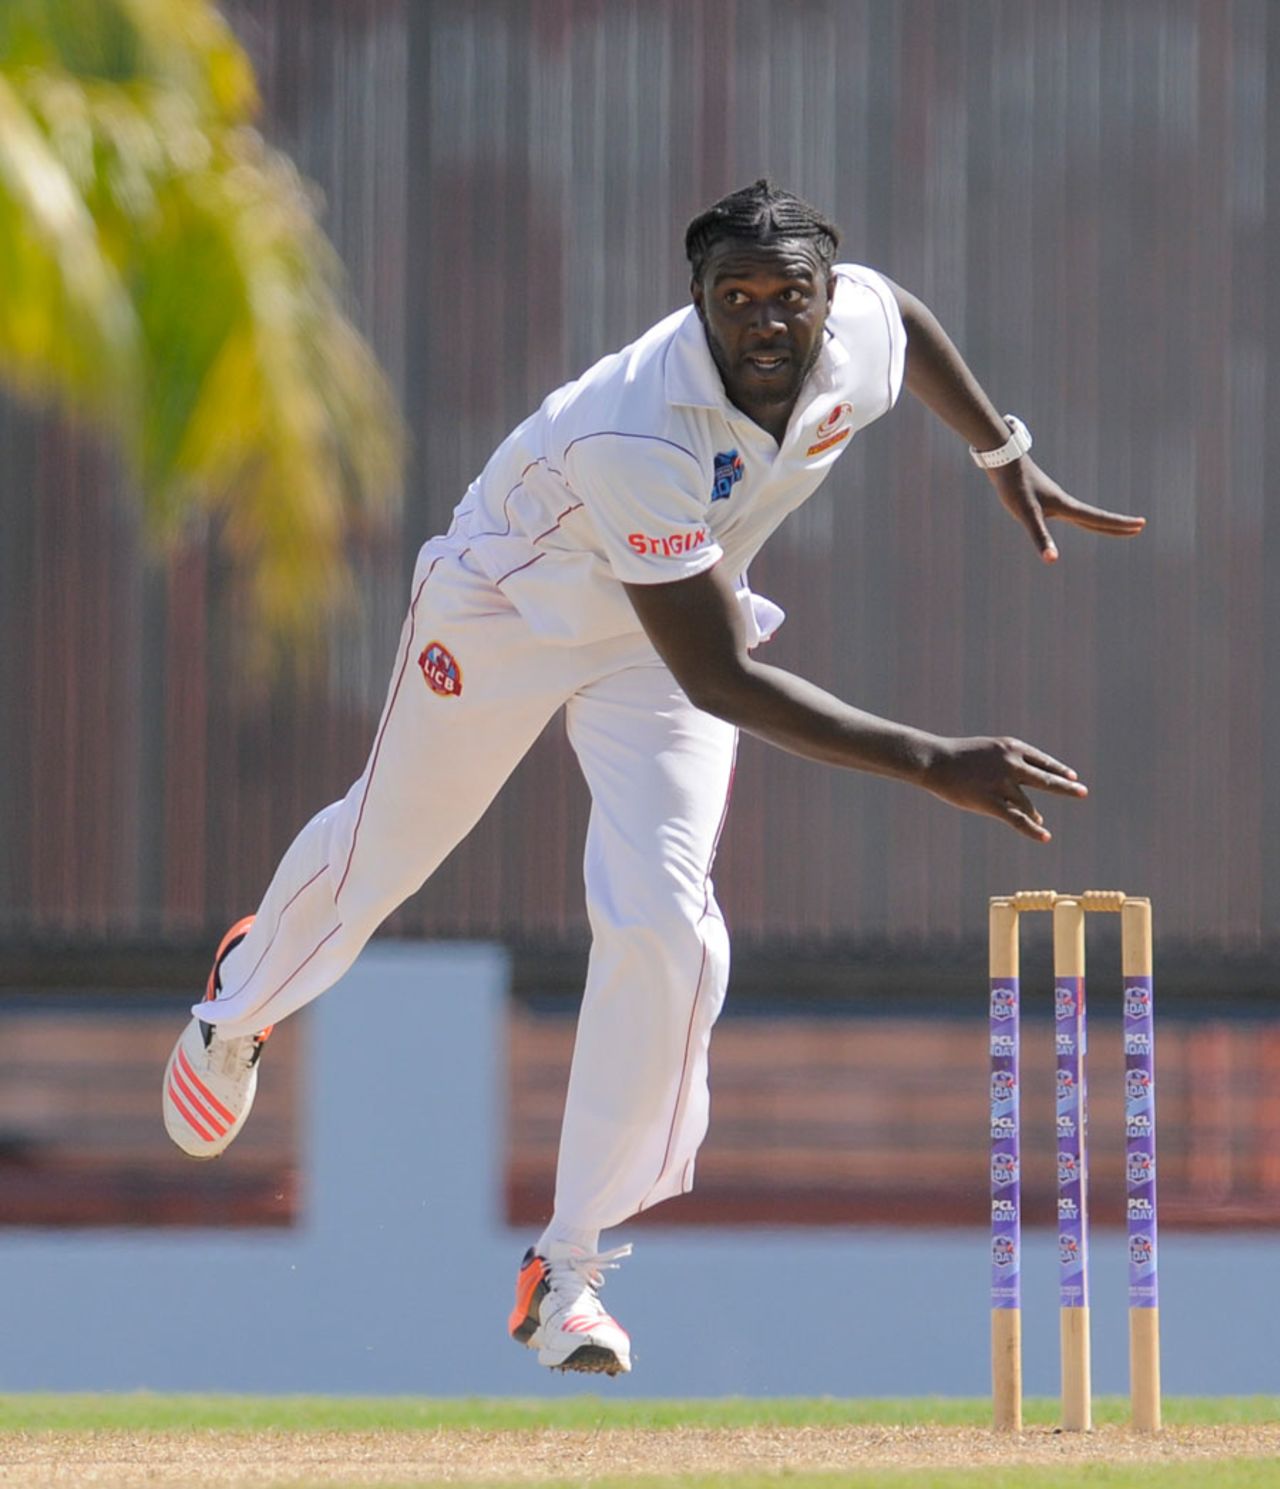 Gavin Tonge picked up the first four wickets to fall, Barbados v Leeward Islands, 1st day, WICB Regional 4 Day Tournament, Barbados, December 11, 2015